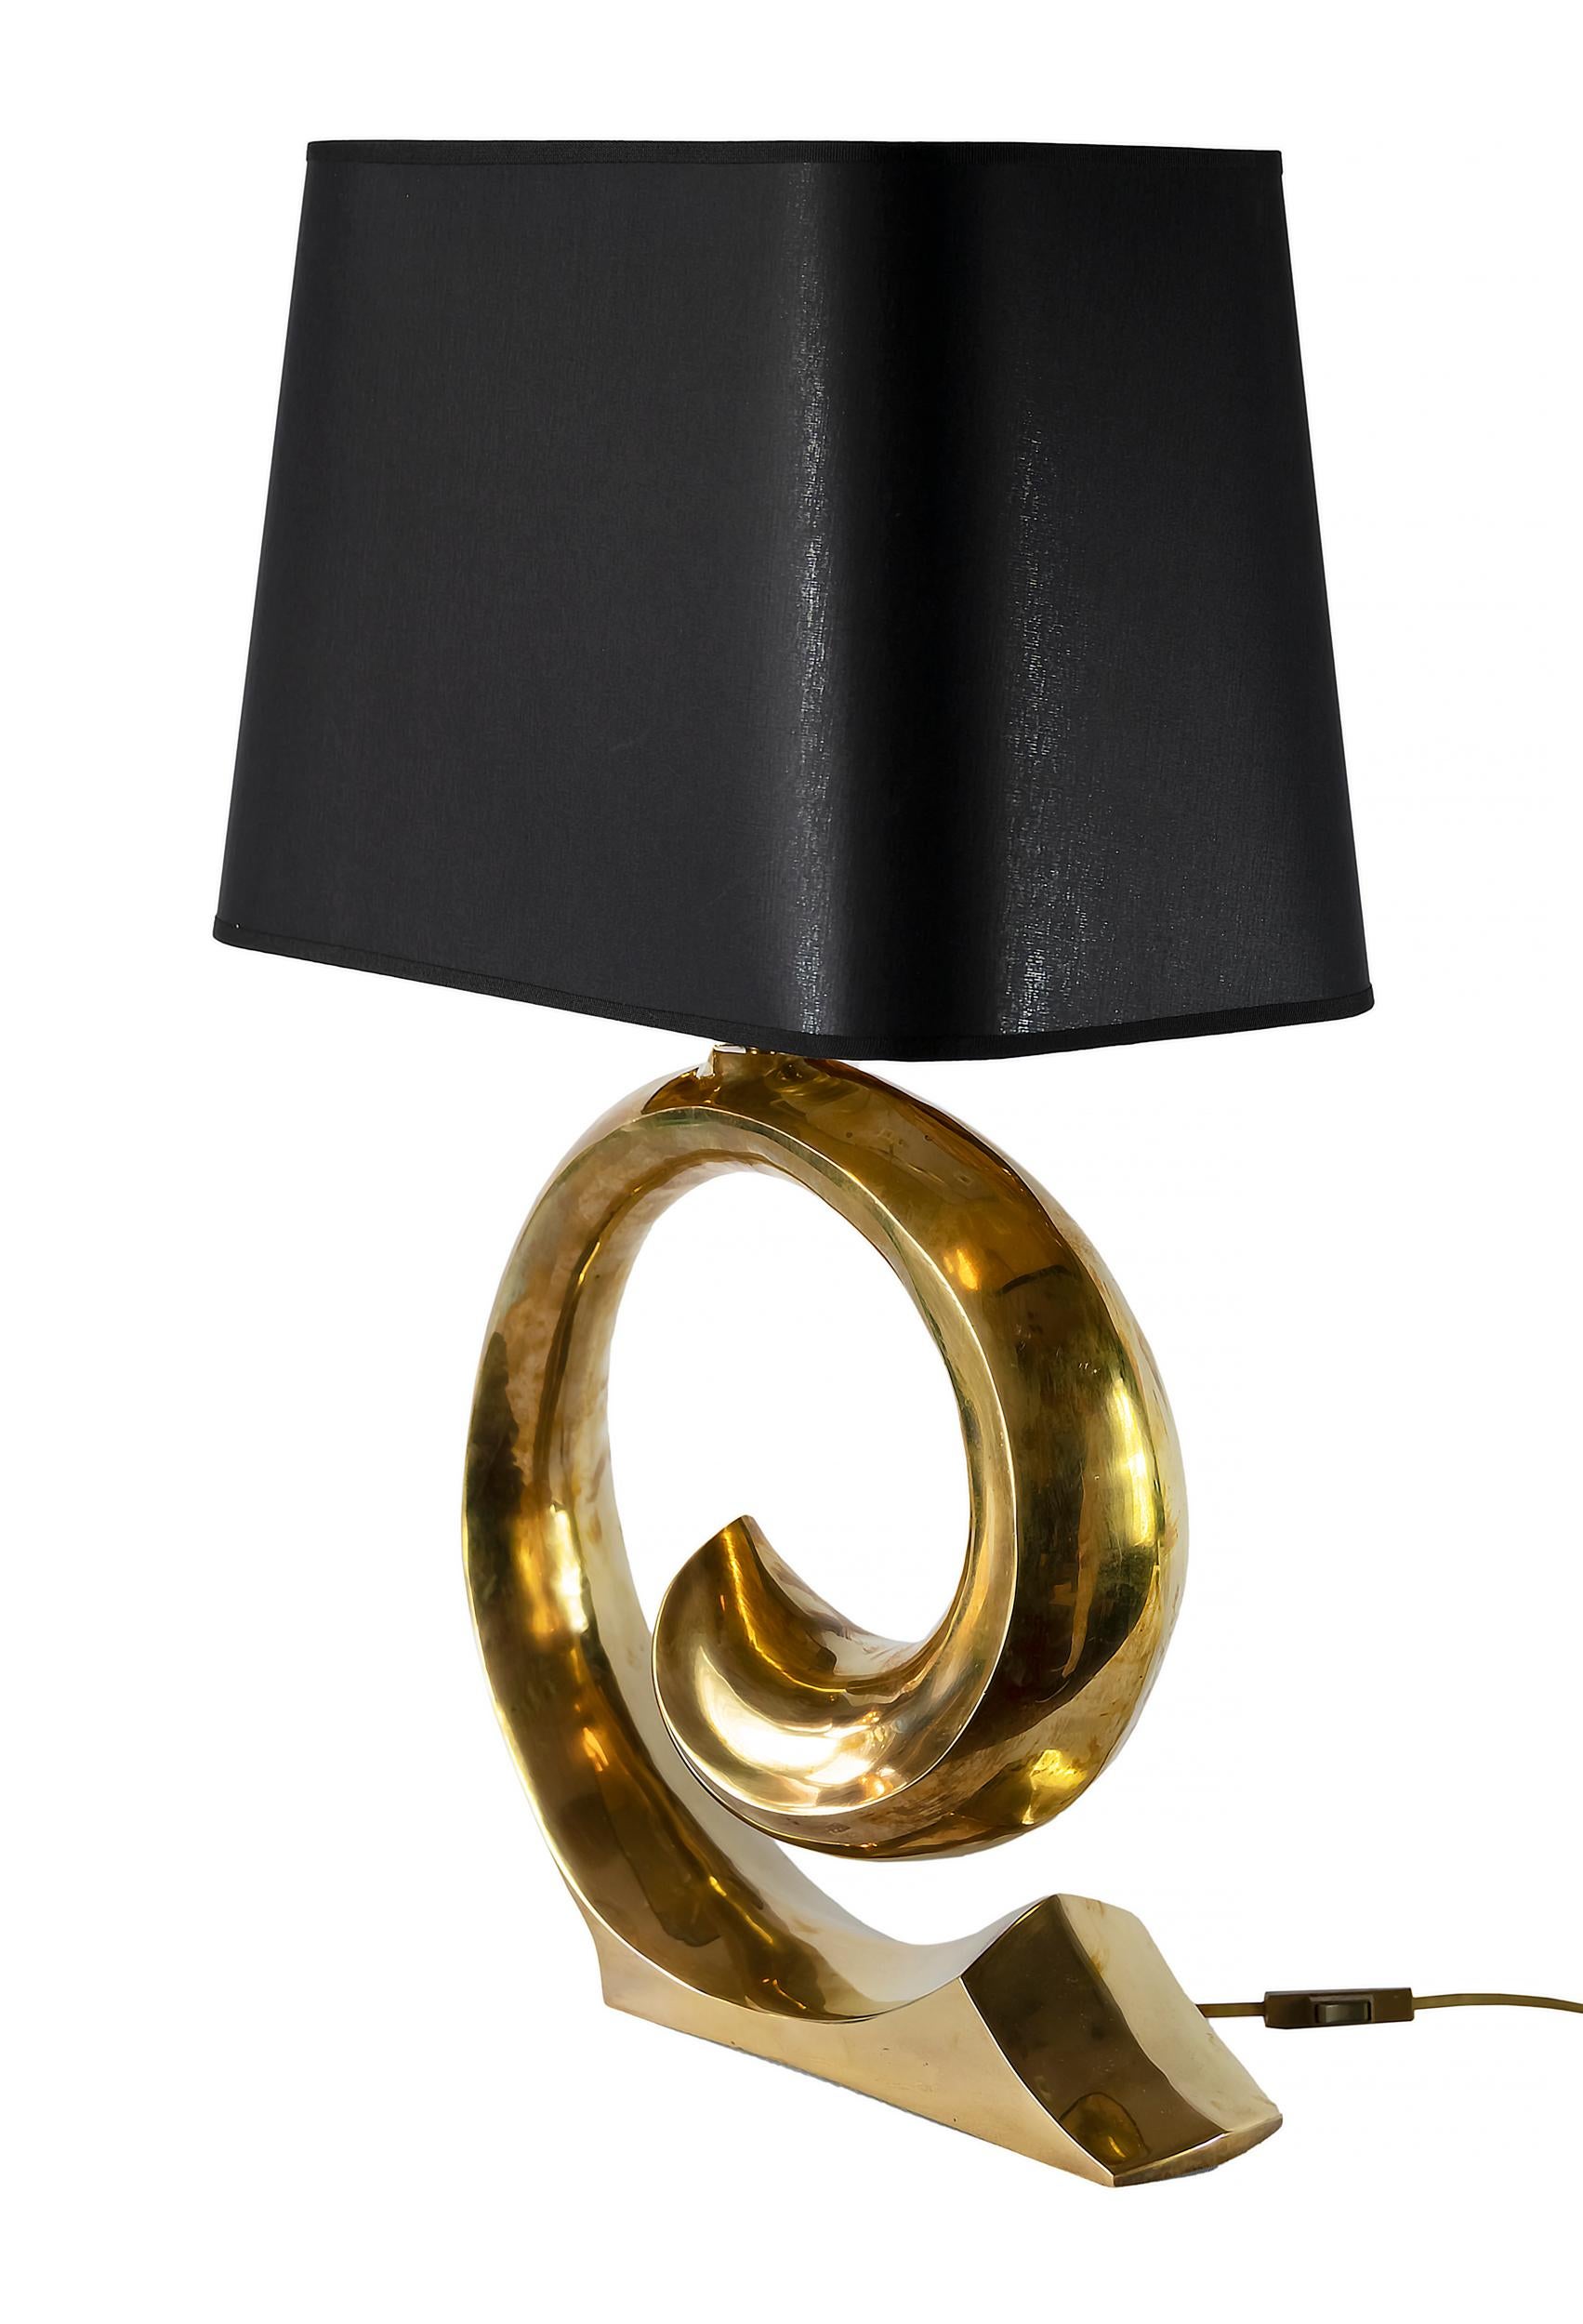 Mid-Century Modern Vintage French Brass Table Lamp by Pierre Cardin, 1970's For Sale